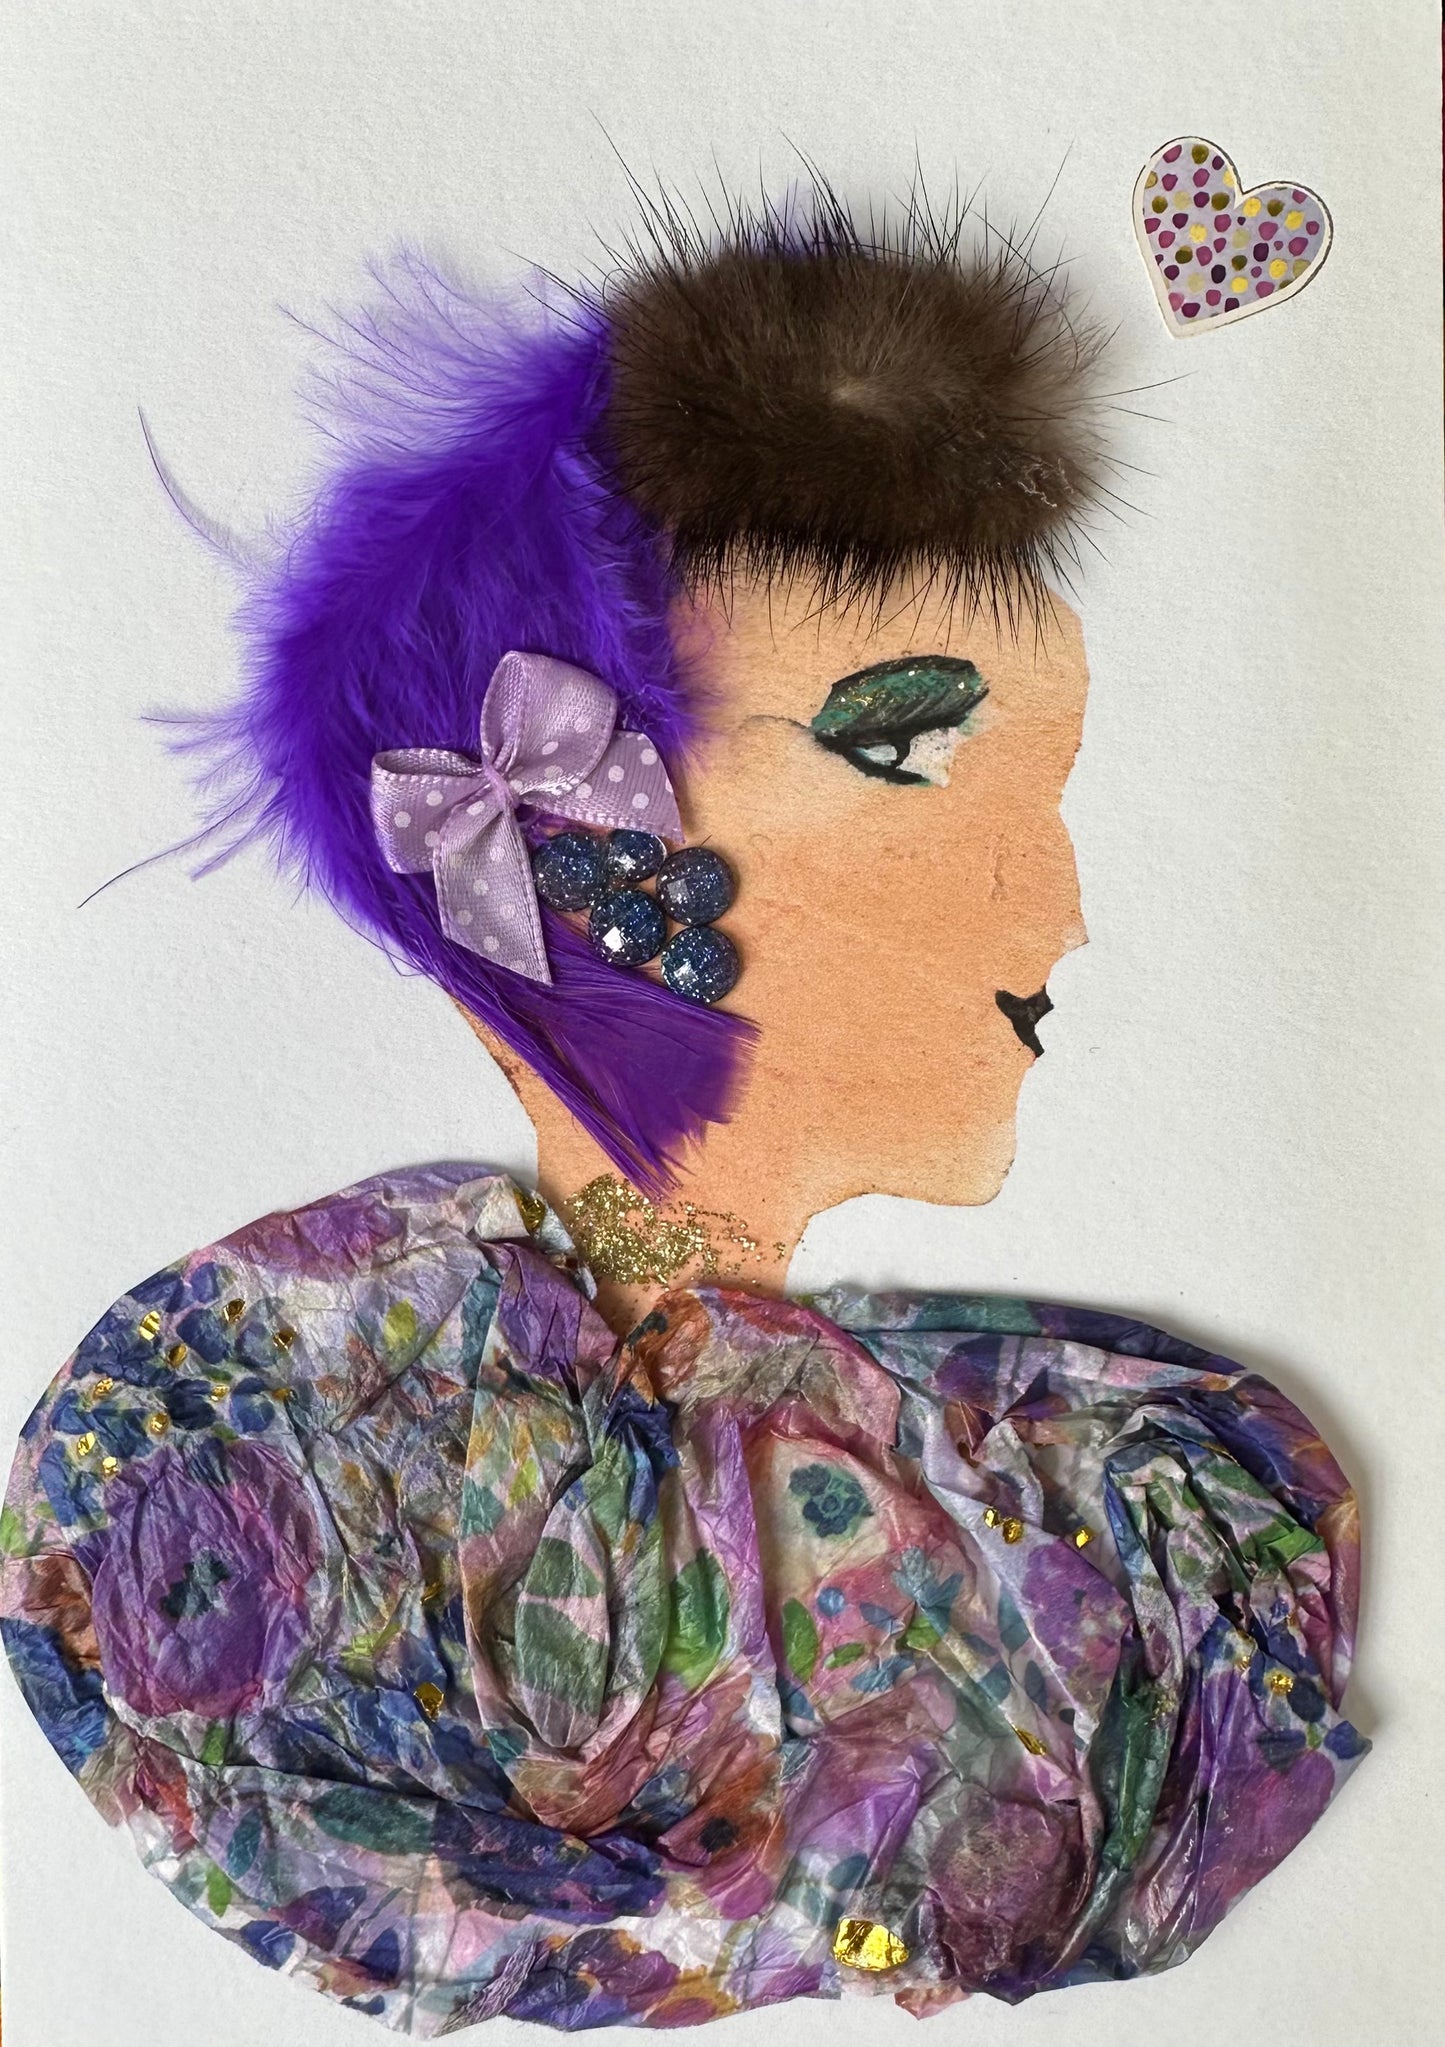 I made this handmade card of a woman wearing a multi-coloured blouse with mainly different shades of purple, but also incorporating green and red. In her hair, she has a bright purple feather pinned with a light purple bow. There is a spotted heart in the right corner.